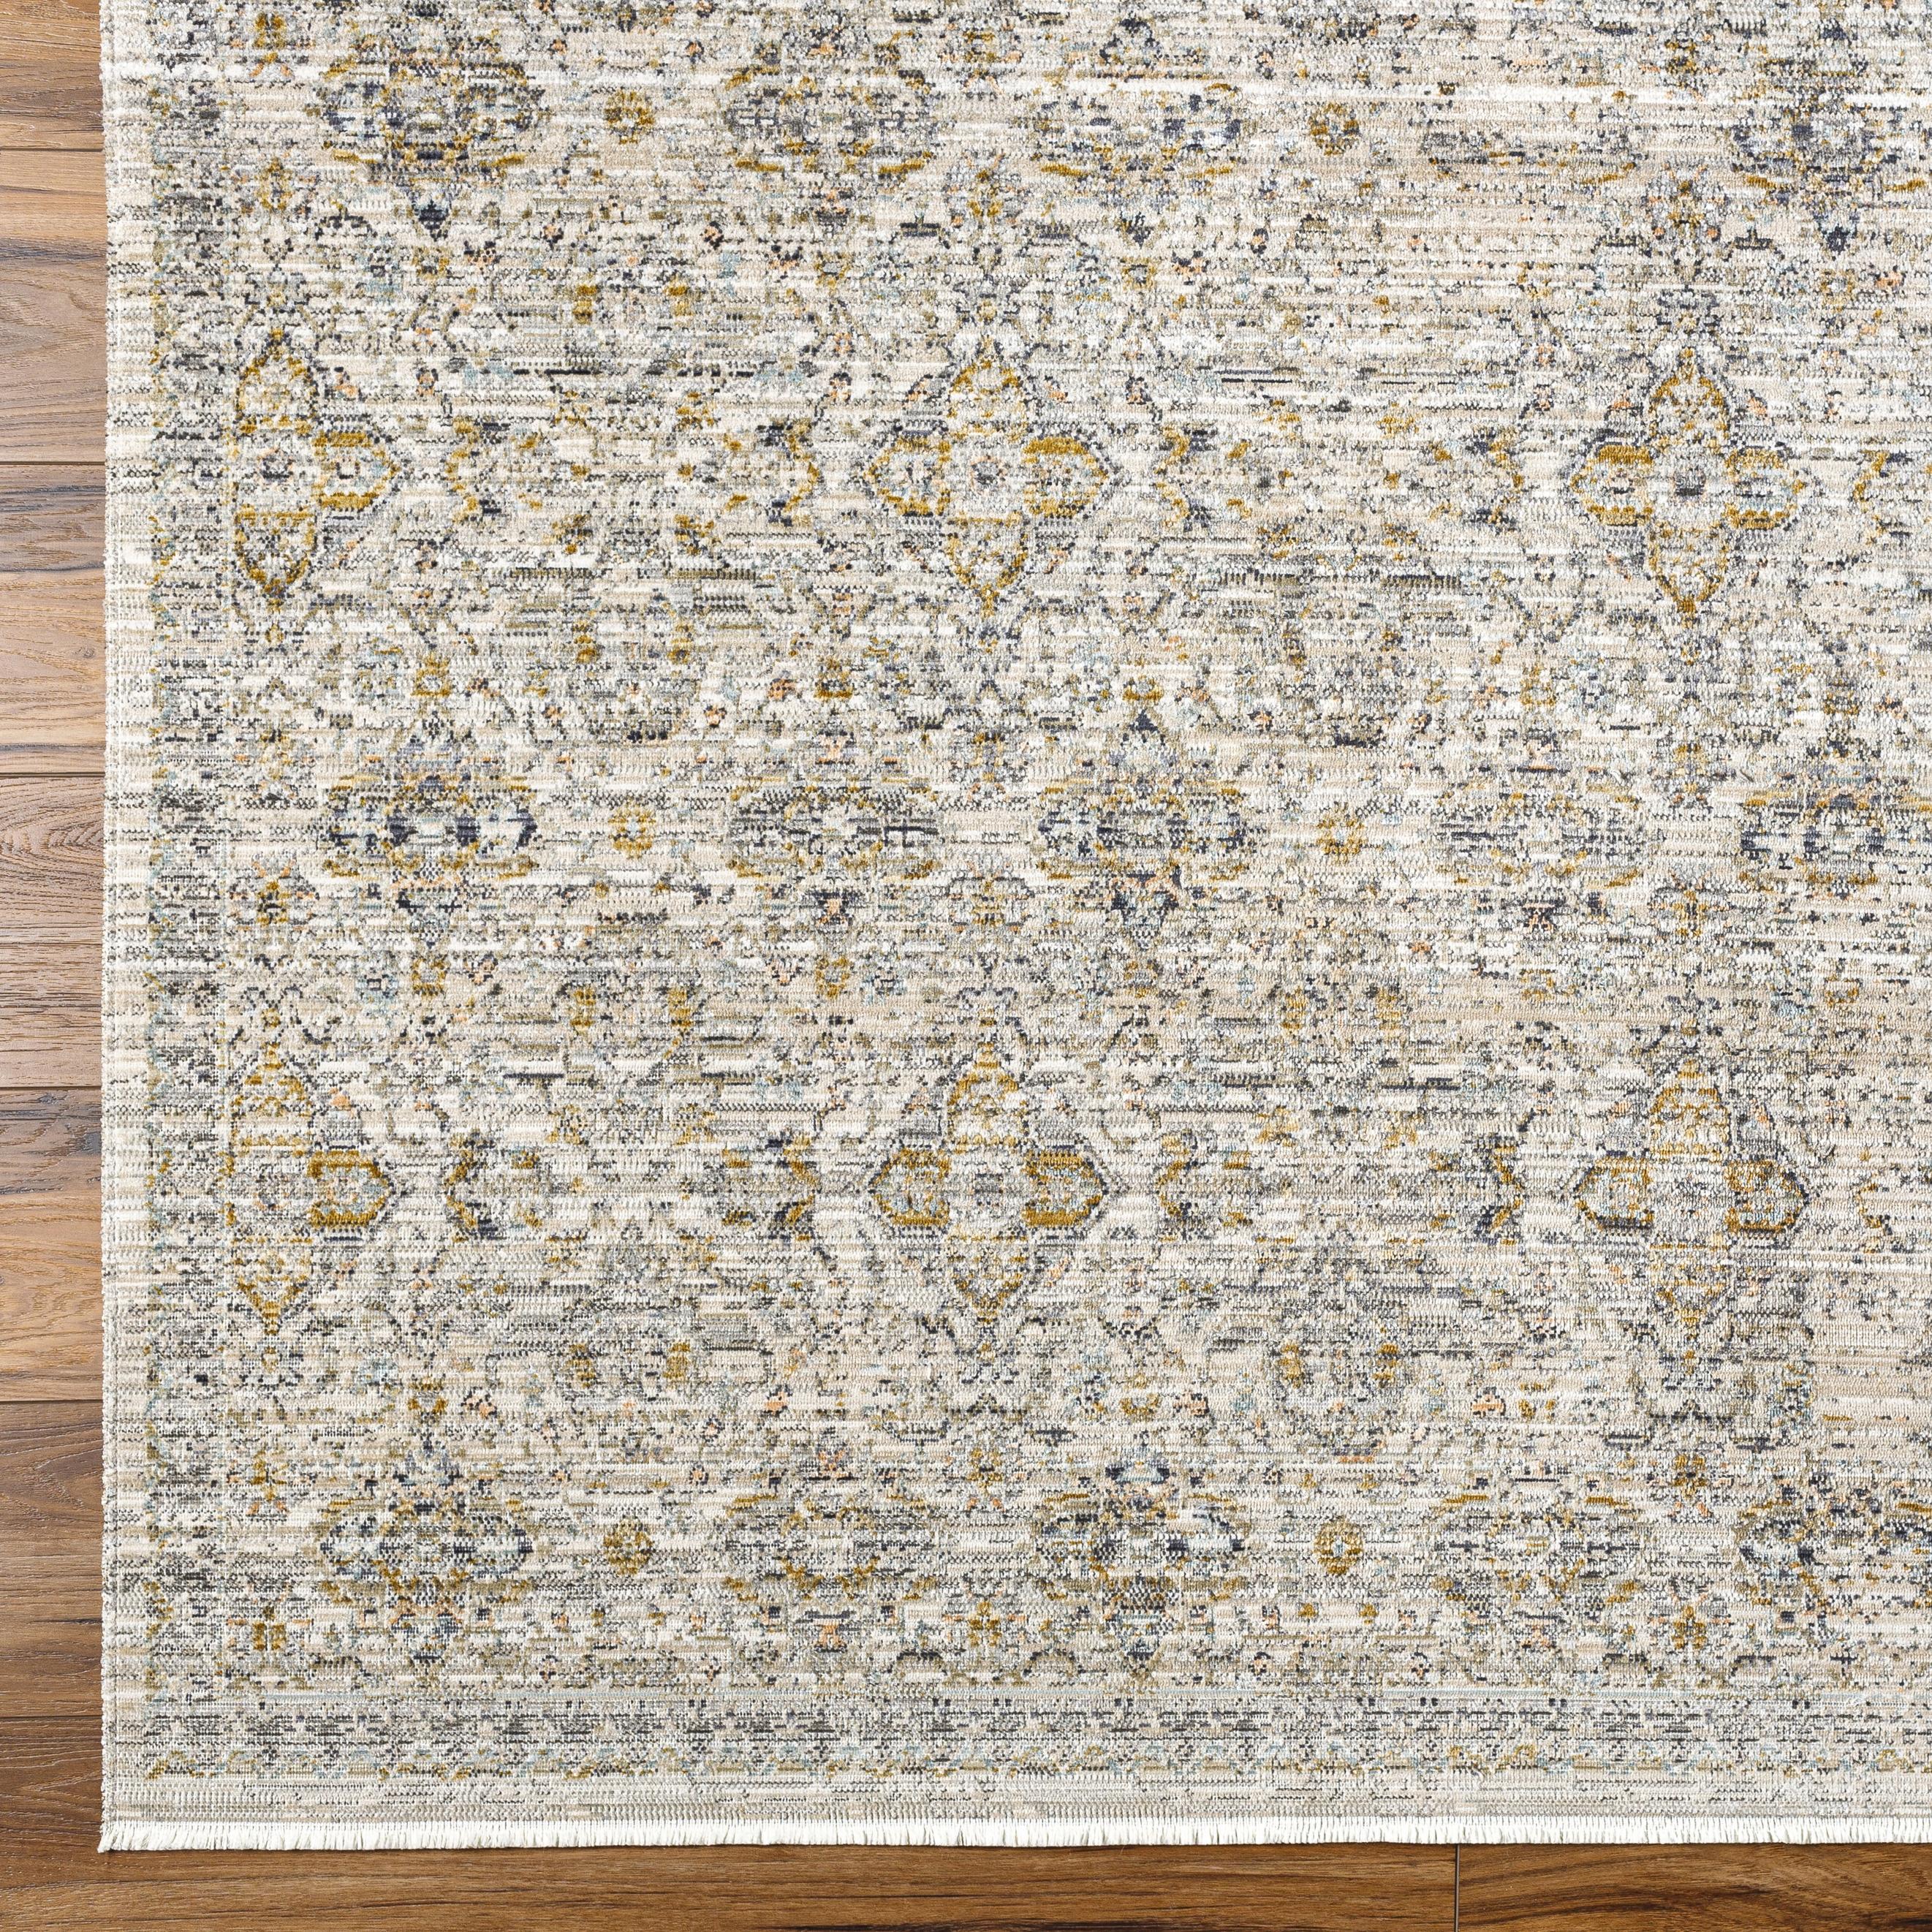 Introduce your home to the timeless beauty of the Margaret area rug! This special piece from our Becki Owens x Surya collaboration is the perfect way to add a vintage-inspired touch to any space. Amethyst Home provides interior design, new home construction design consulting, vintage area rugs, and lighting in the Park City metro area.